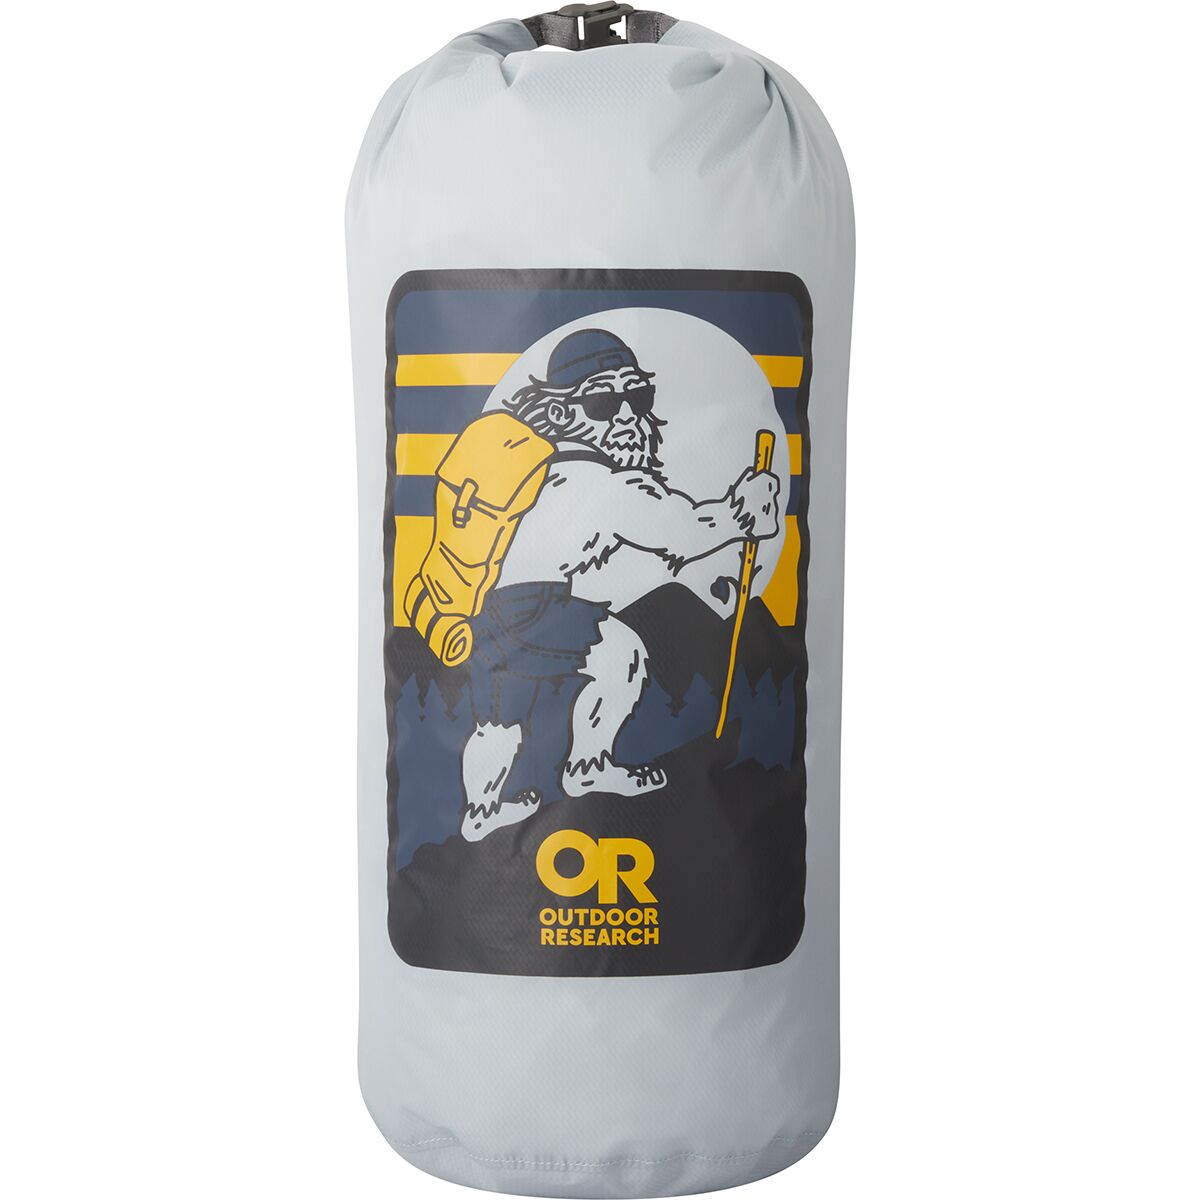 Outdoor Research PackOut Graphic Dry Bag 8L